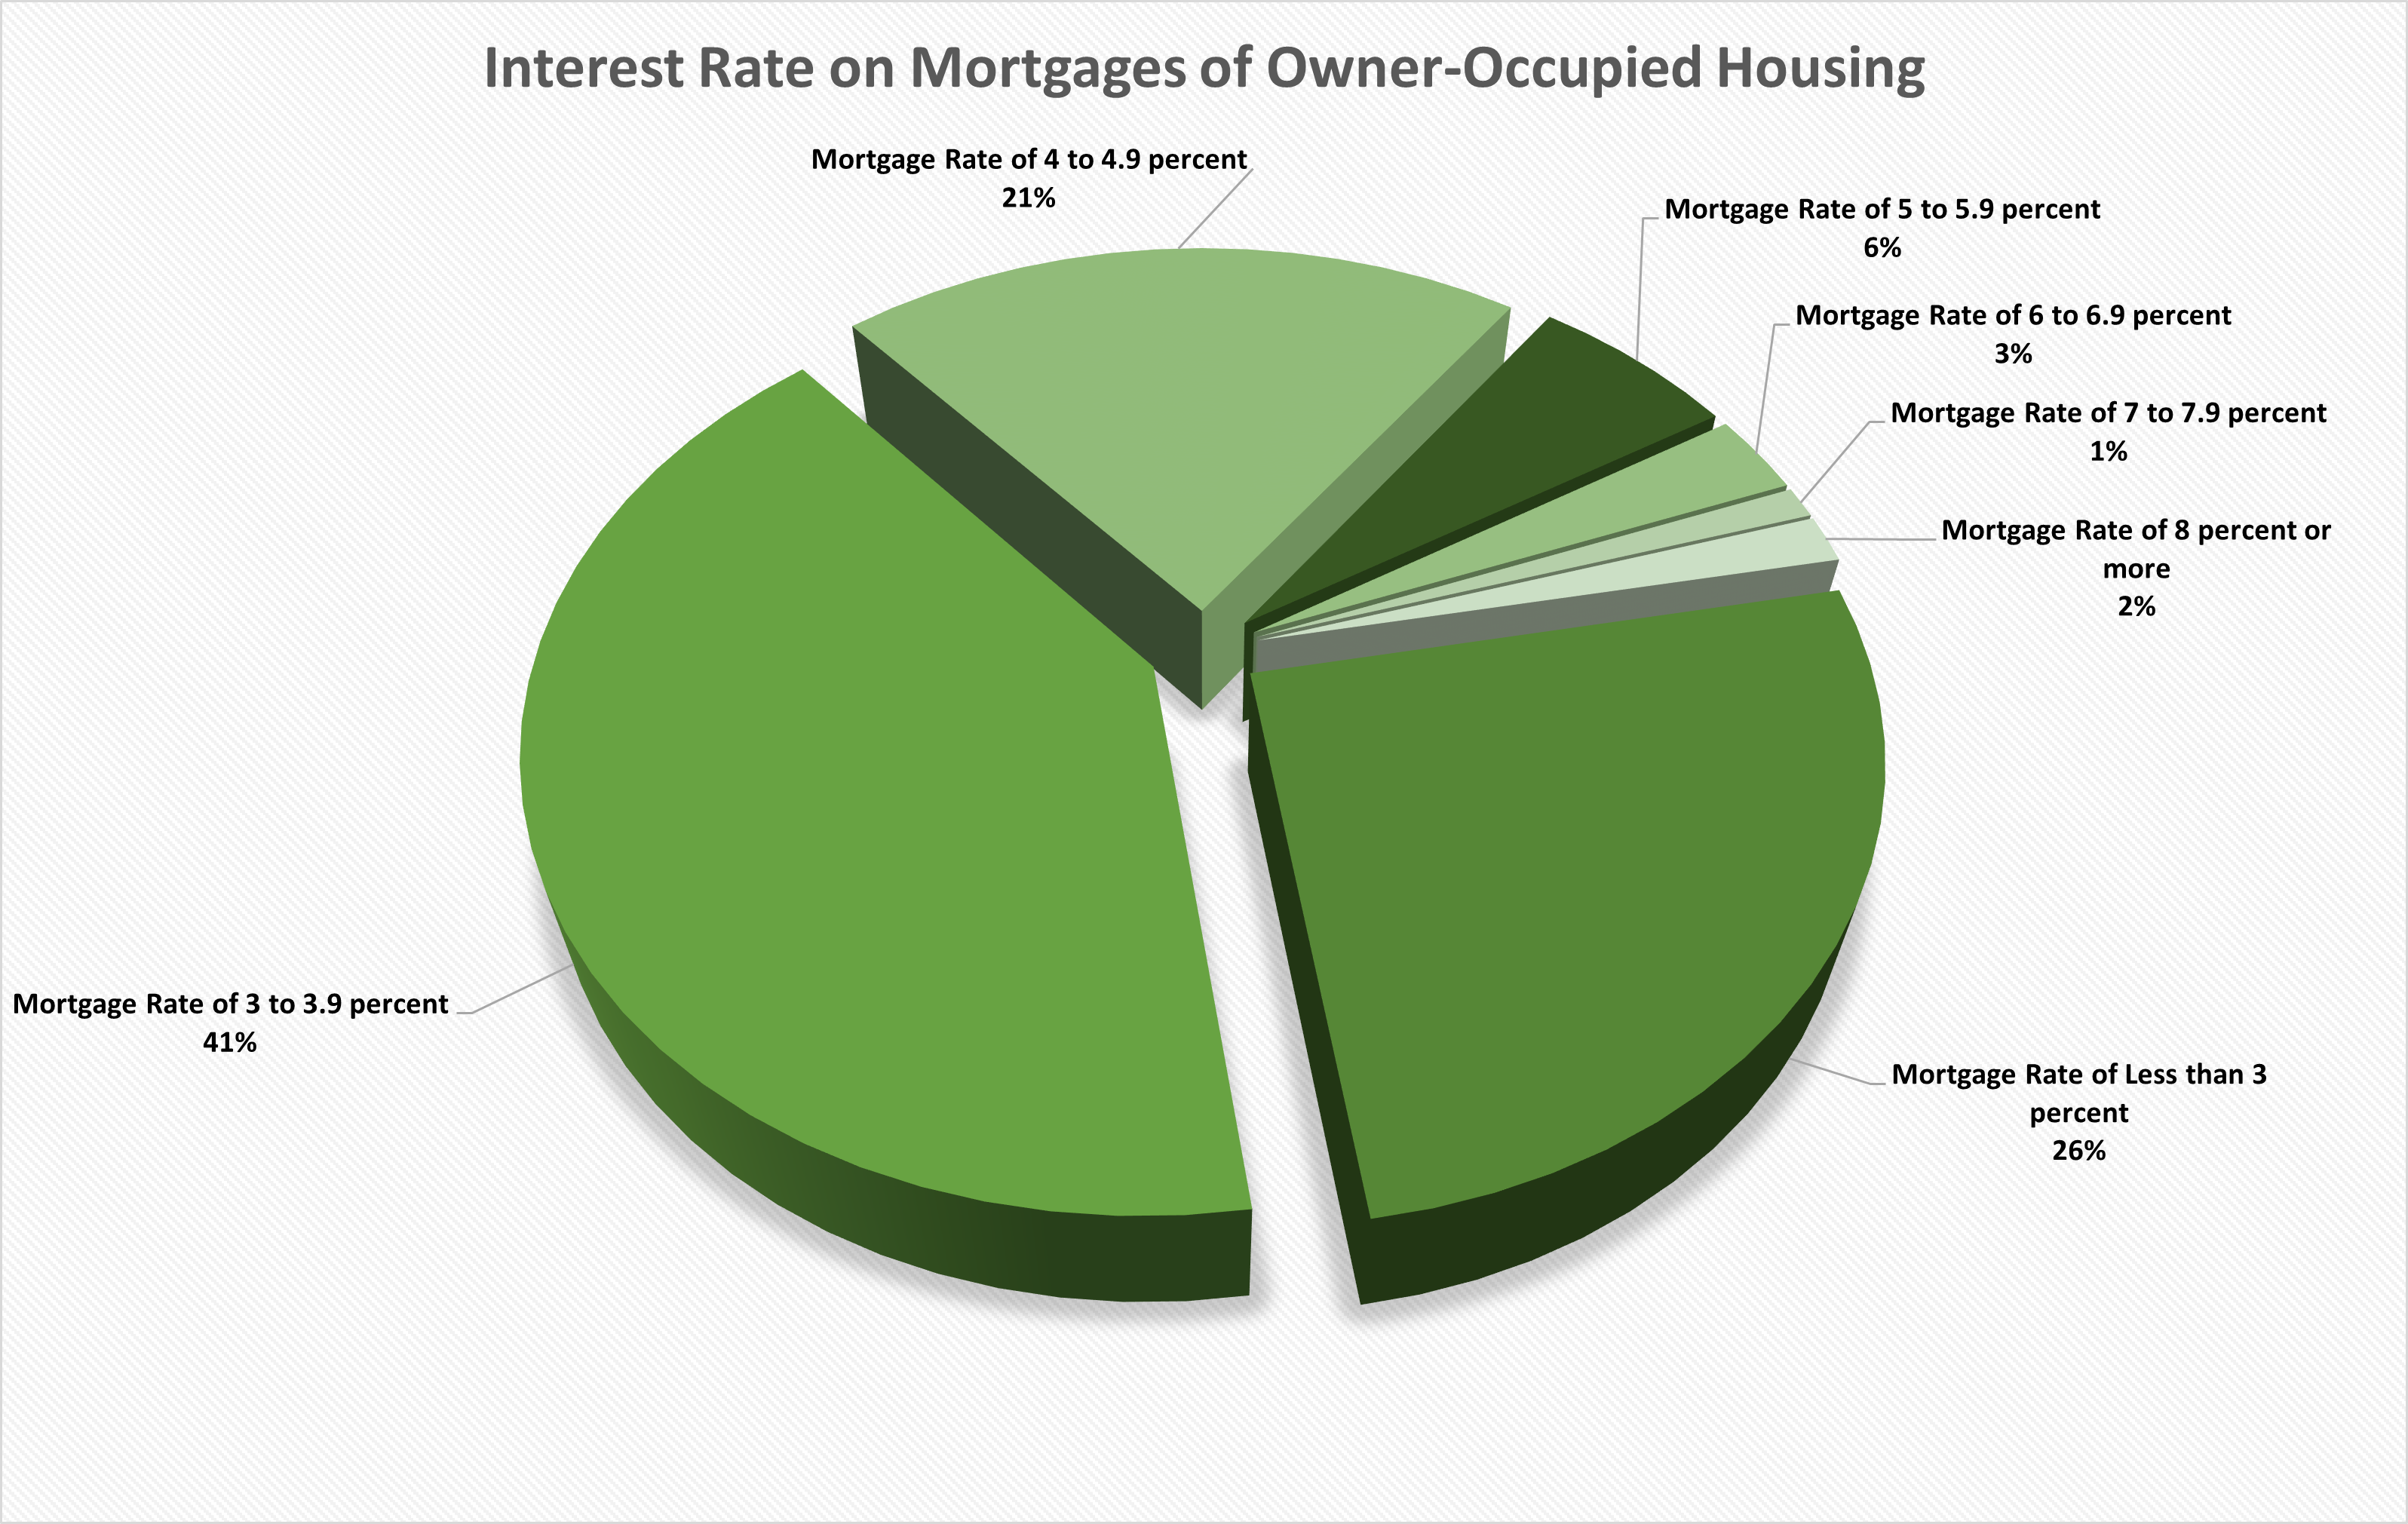 Interest Rates on Mortgages of Owner-Occupied Housing